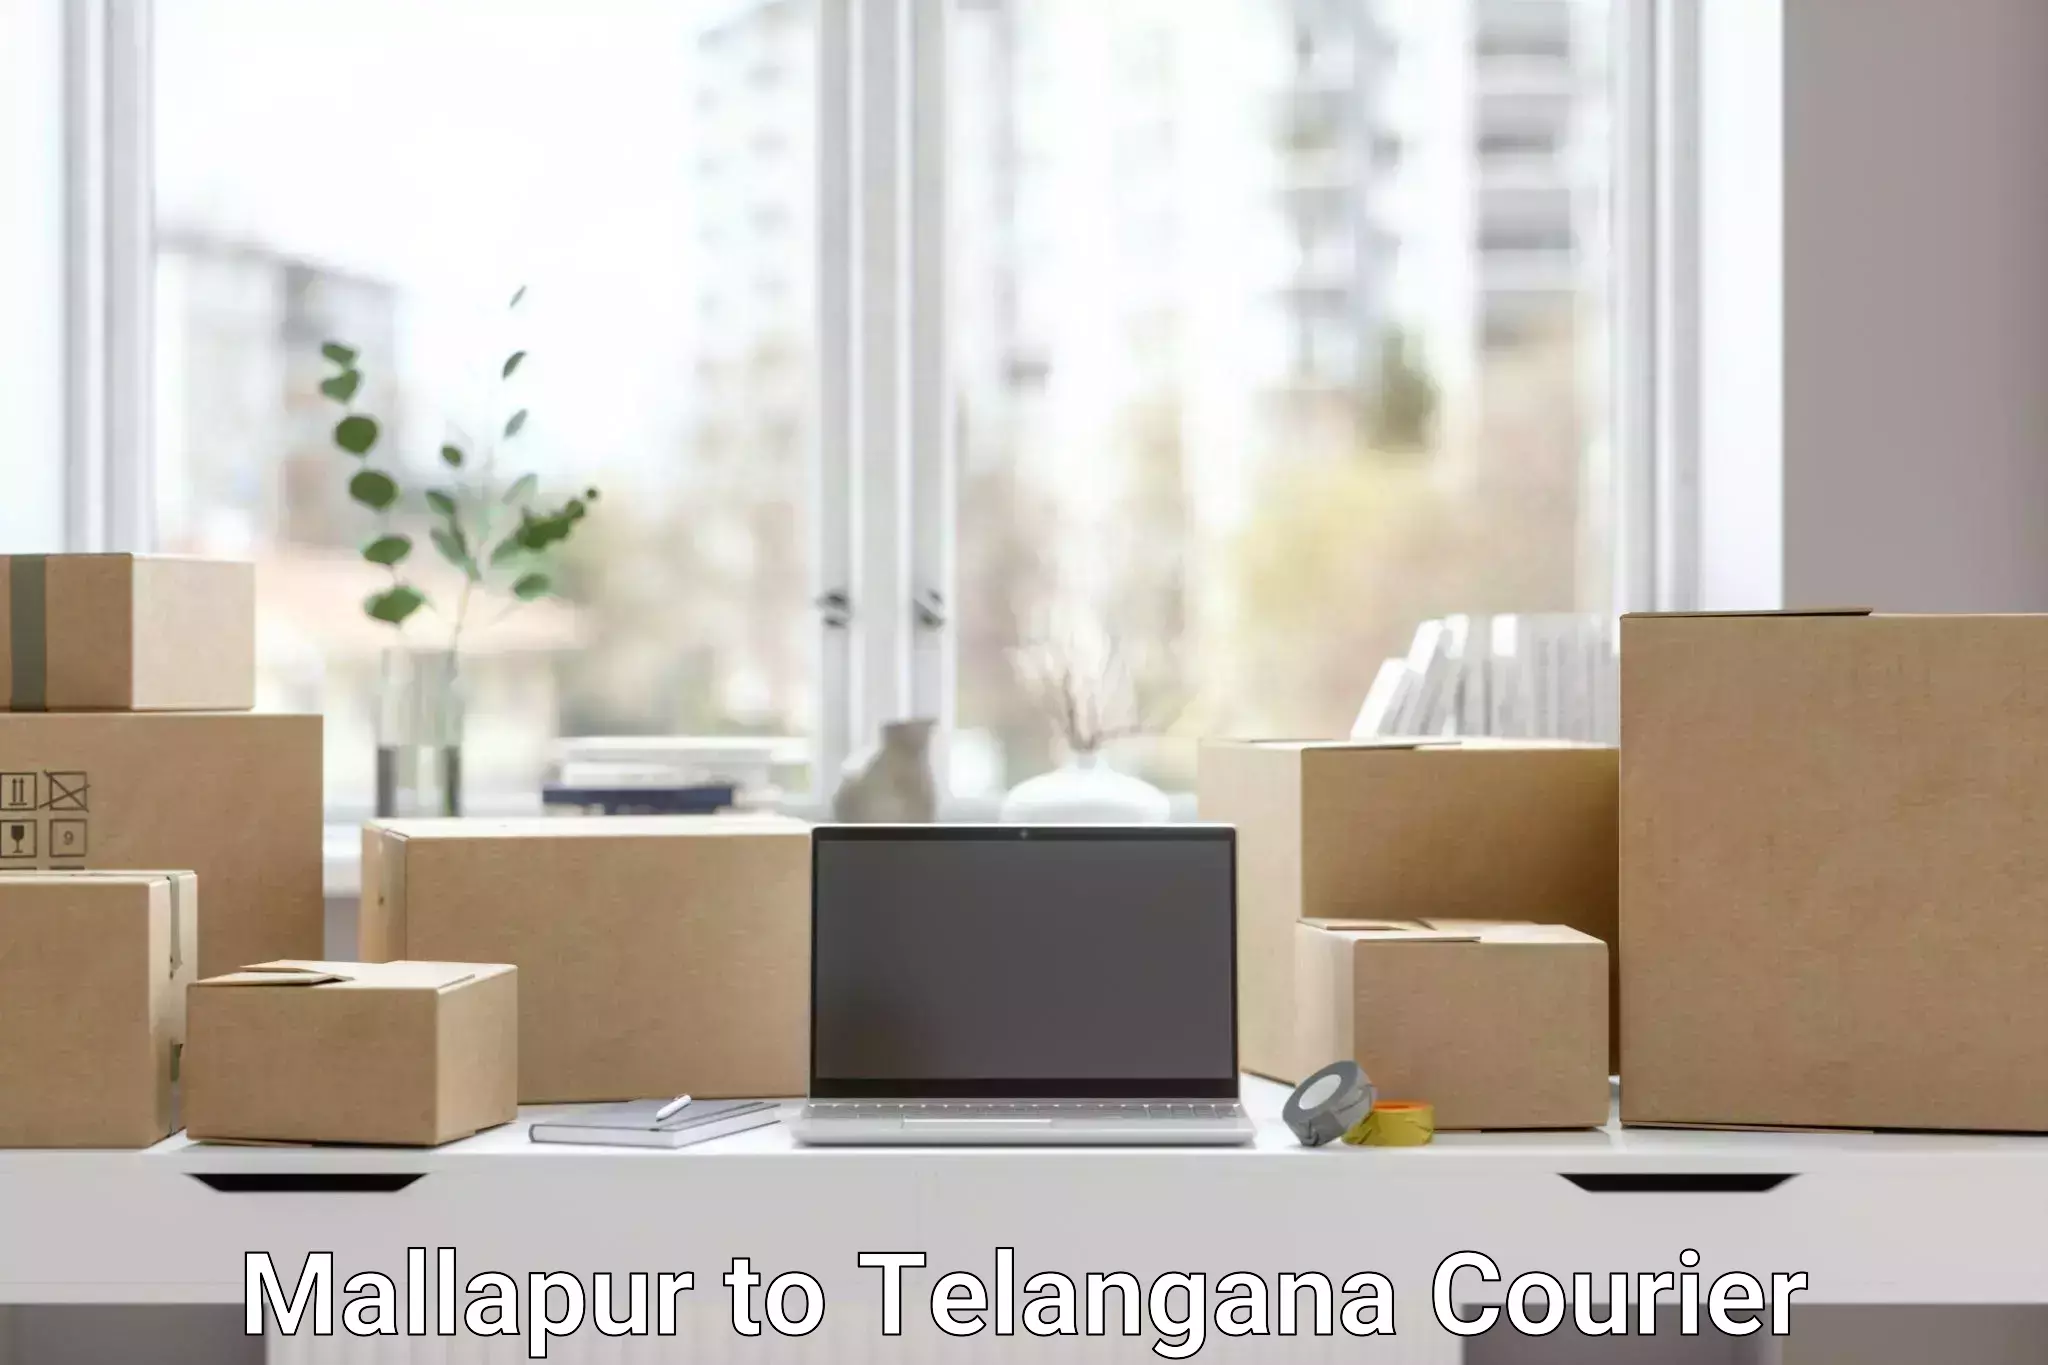 Global shipping networks in Mallapur to Khairatabad